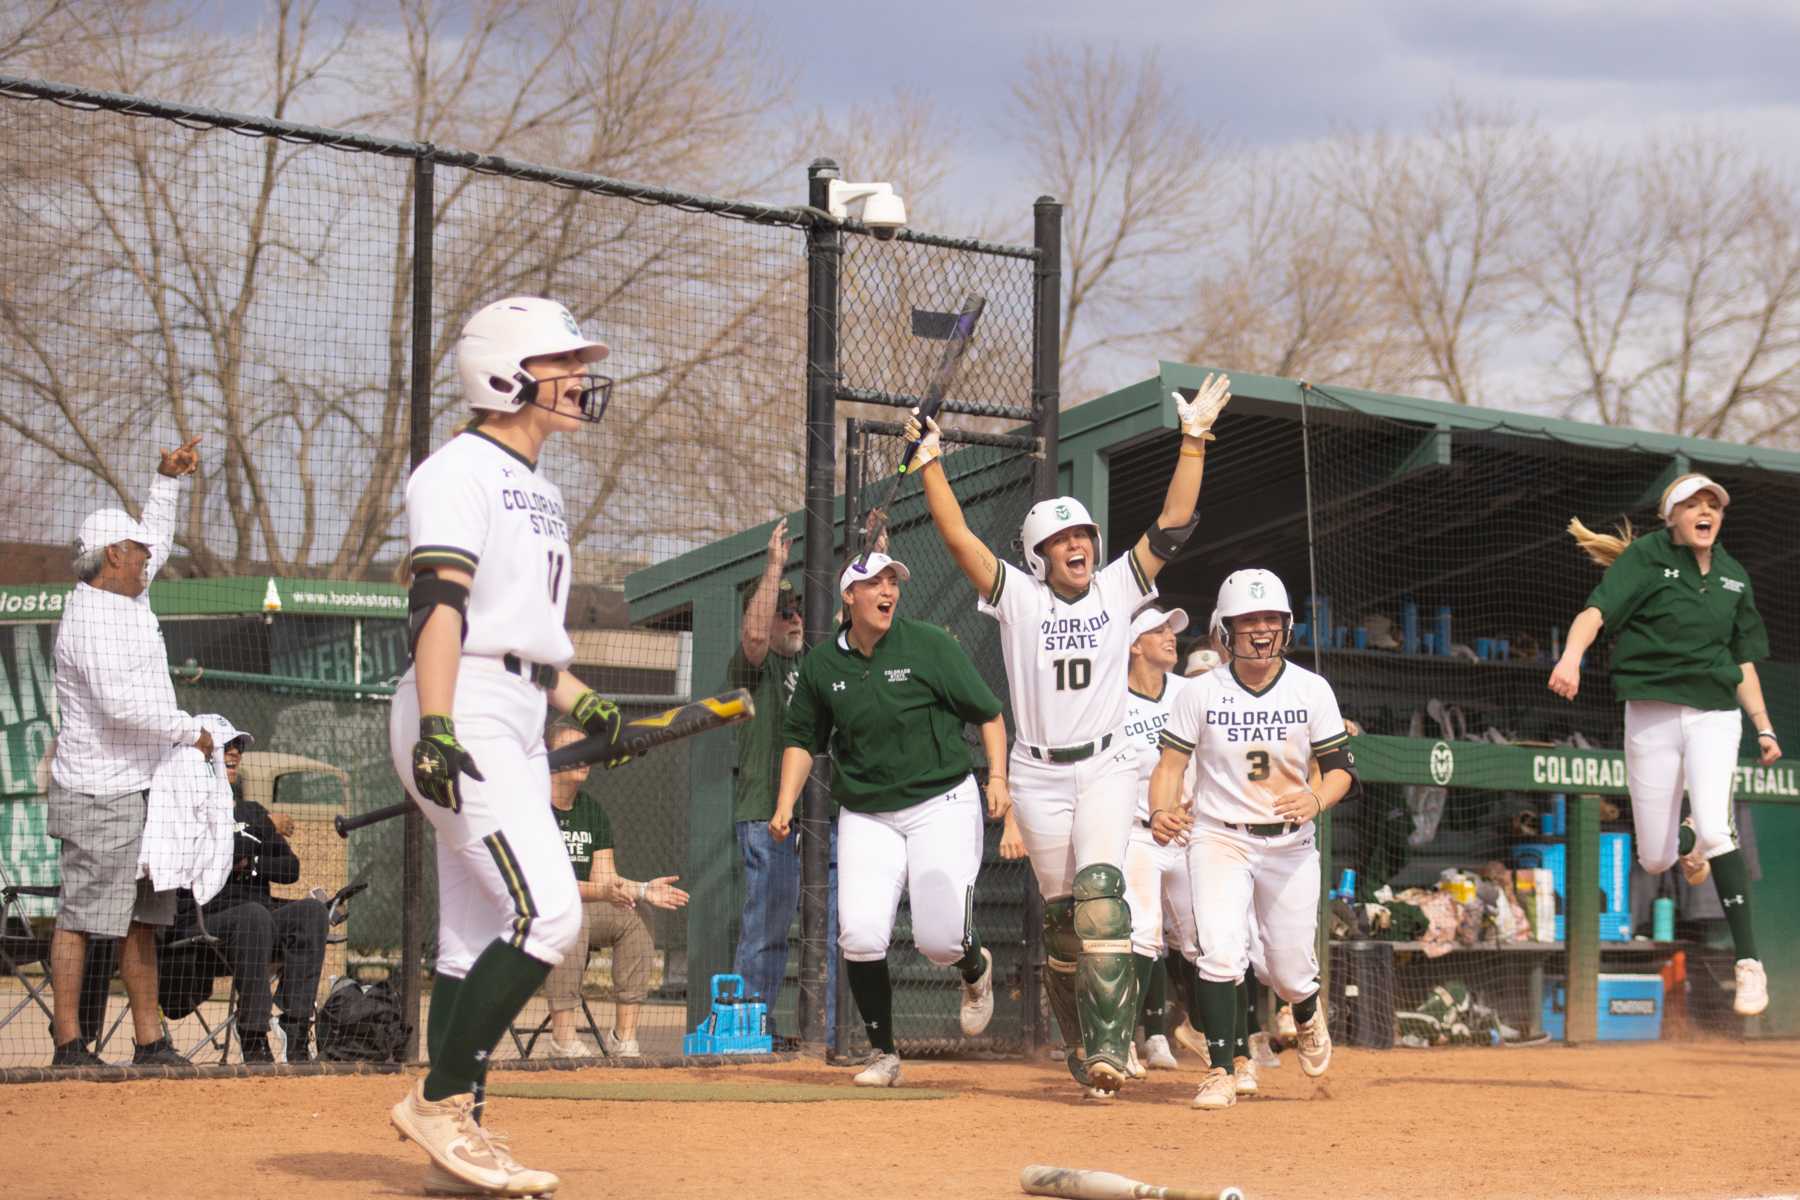 The Colorado State team celebrates after a home run